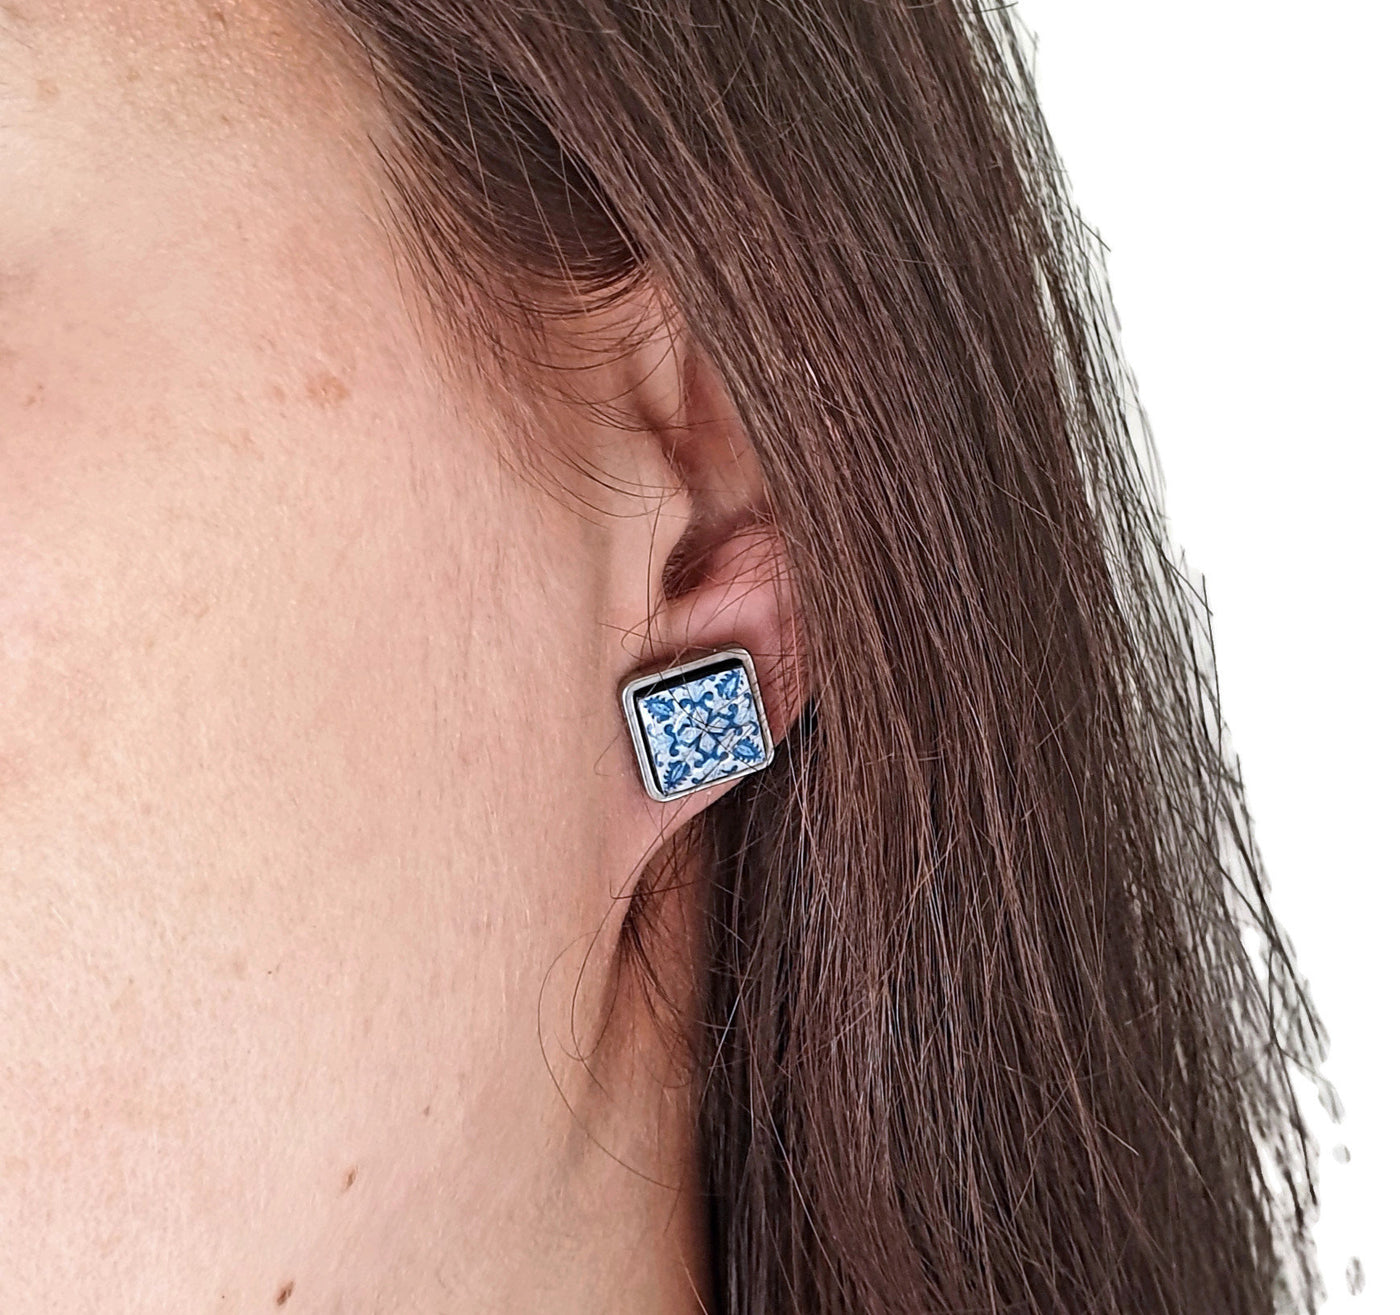 Small antique tile earrings, Portuguese small tiles, blue tile stud earrings, Portuguese tiles, azulejos of Portugal, Portuguese jewelry - ineslamy